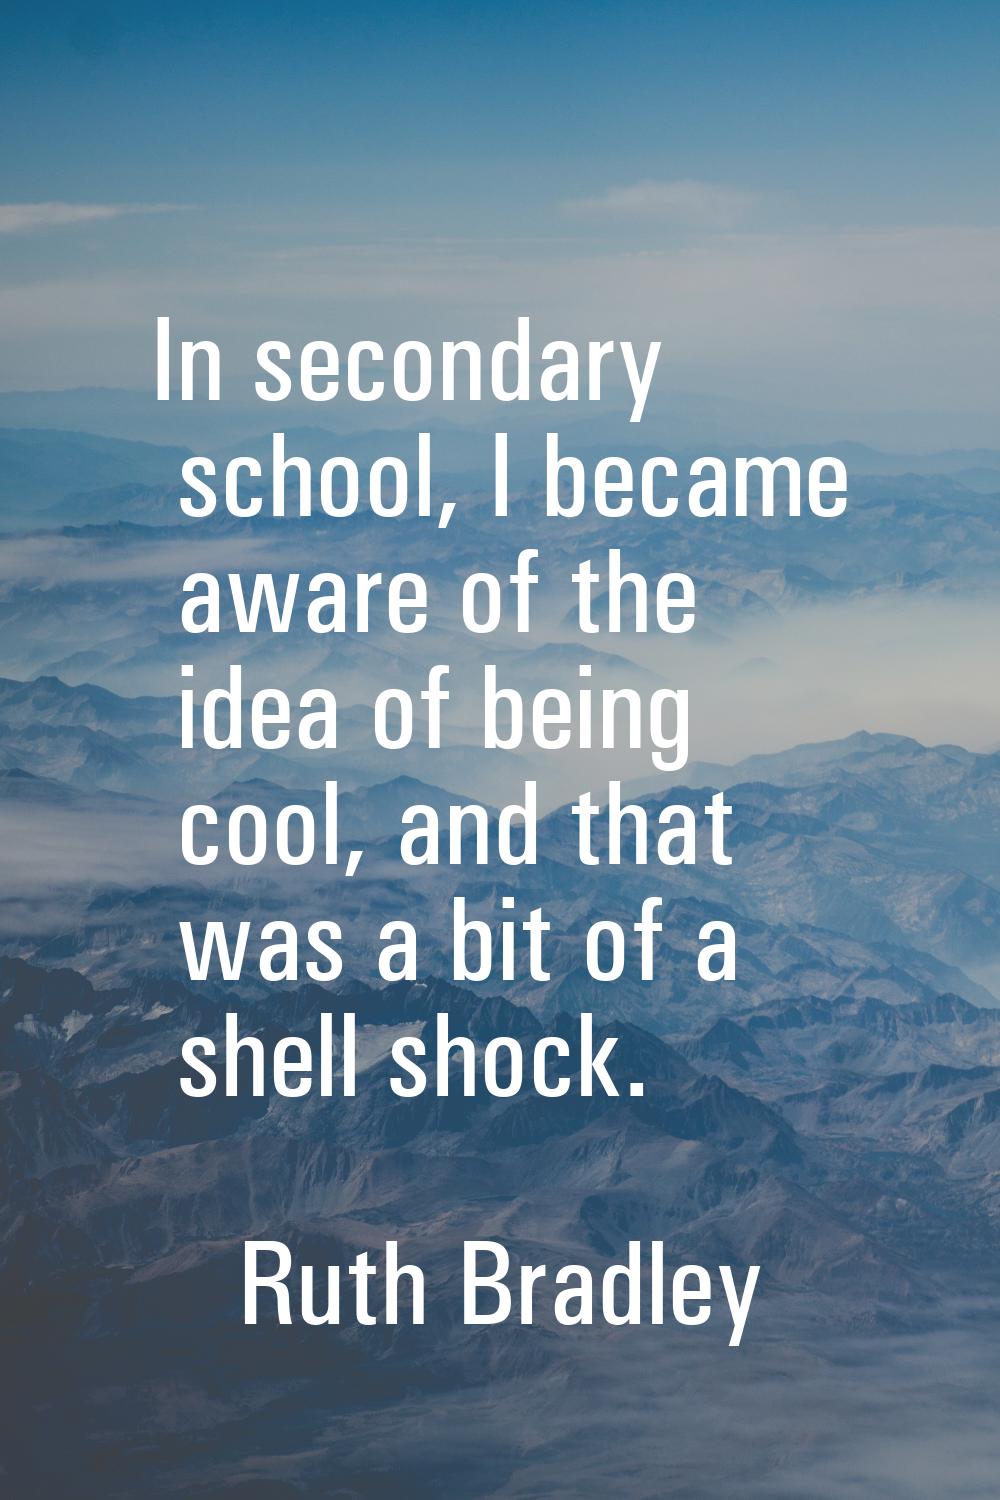 In secondary school, I became aware of the idea of being cool, and that was a bit of a shell shock.